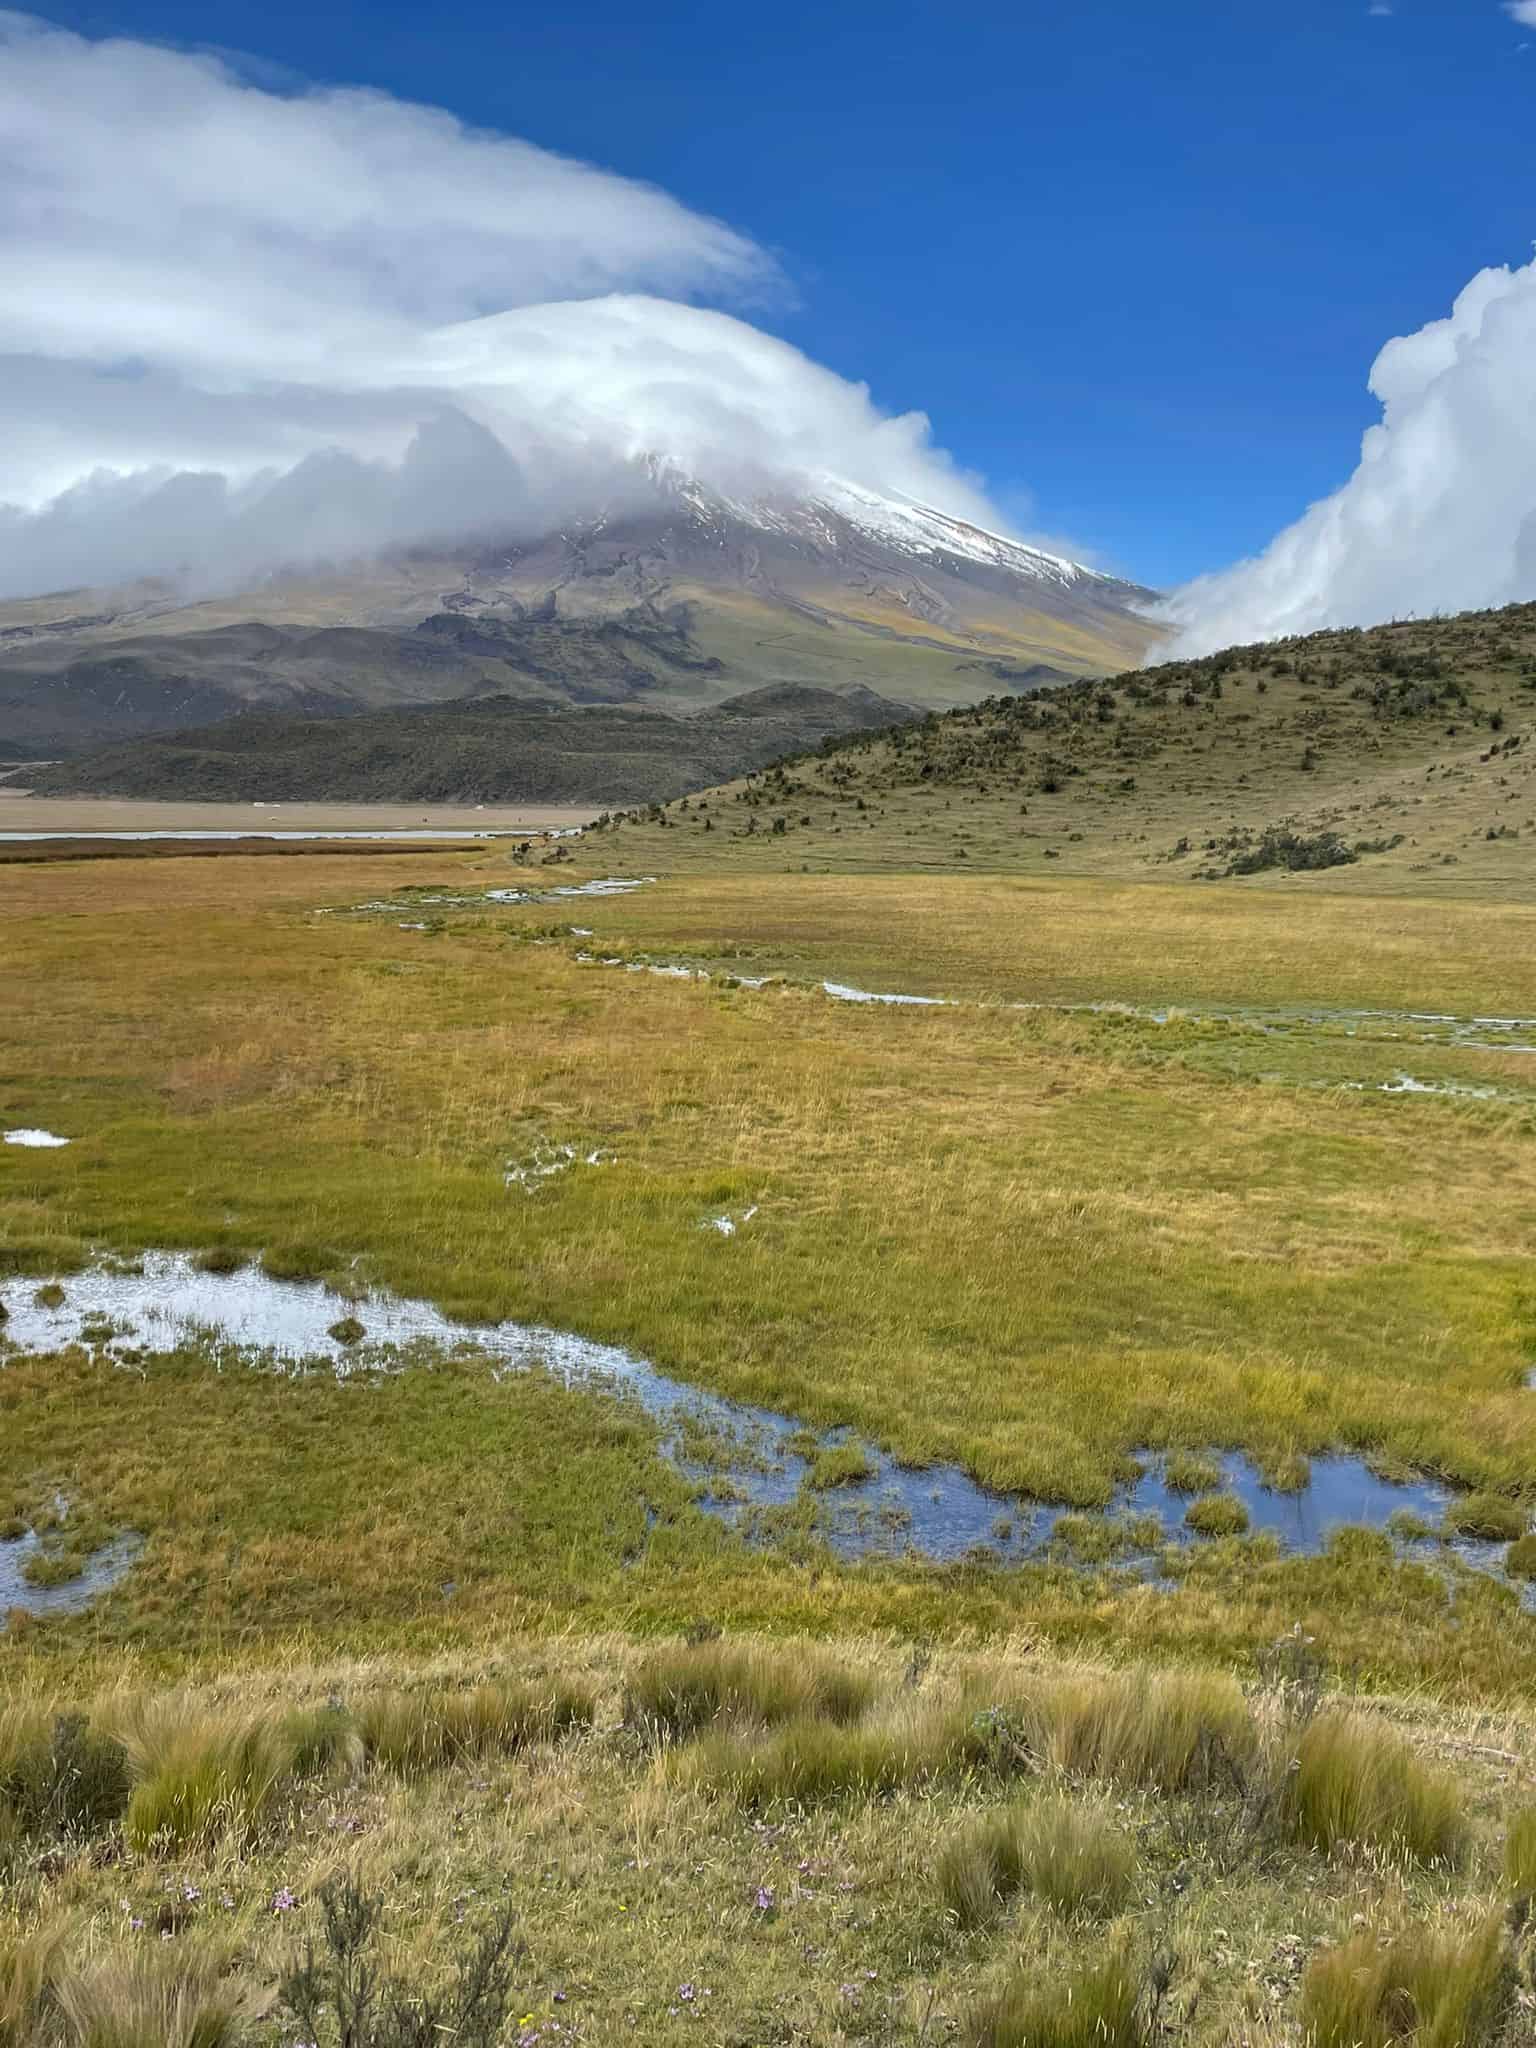 Cotopaxi Volcano in Ecuador. Here the volcano (which is famous for its snow-capped cone) is hidden due to heavy clouds